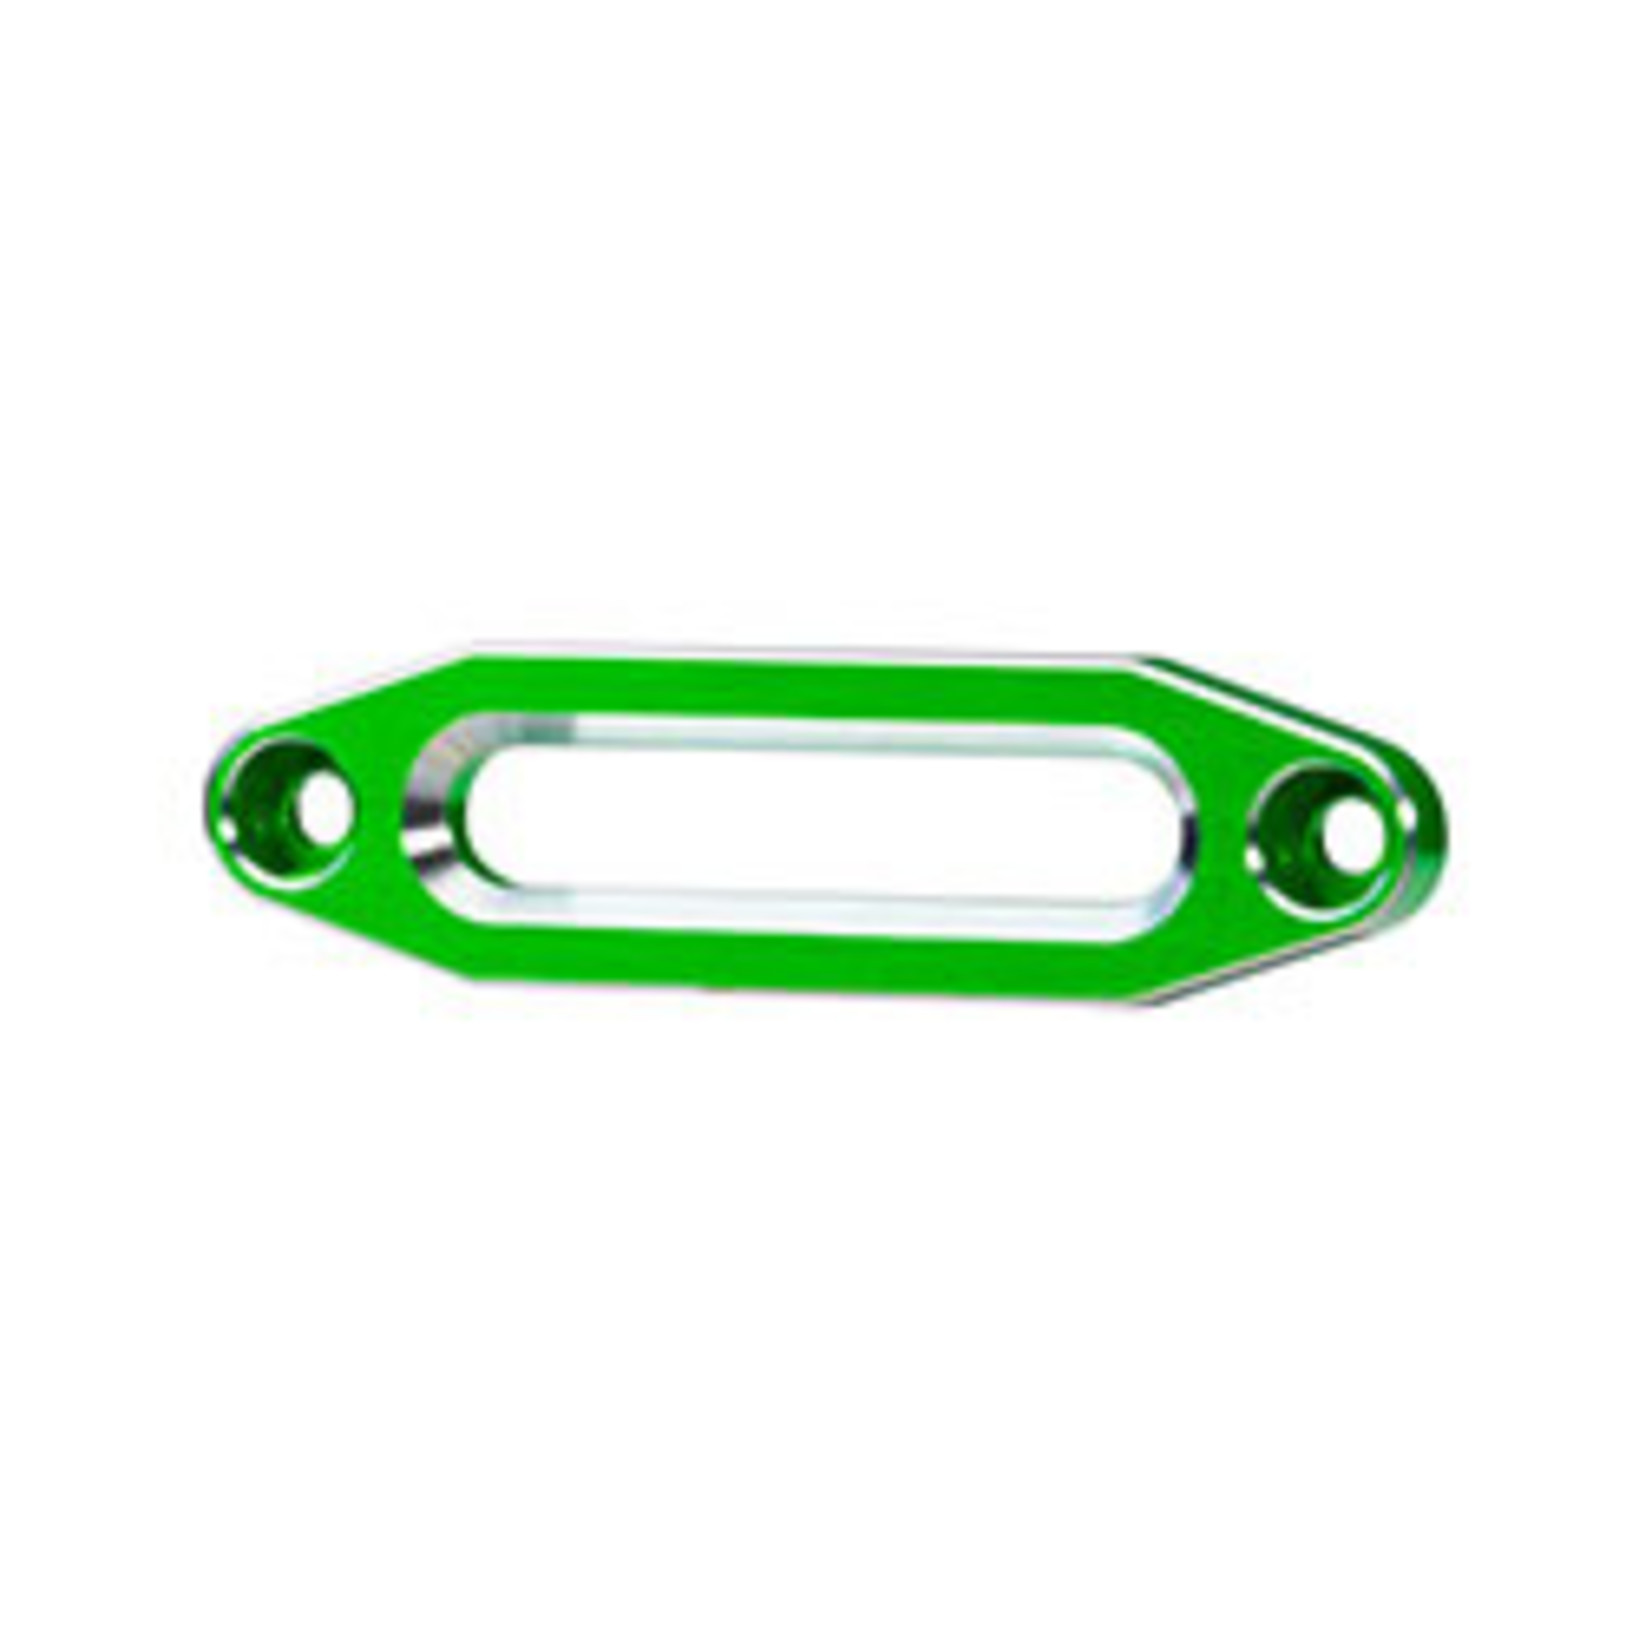 Traxxas Fairlead, winch, aluminum (green-anodized) (use with front bumpers #8865, 8866, 8867, 8869, or 9224)